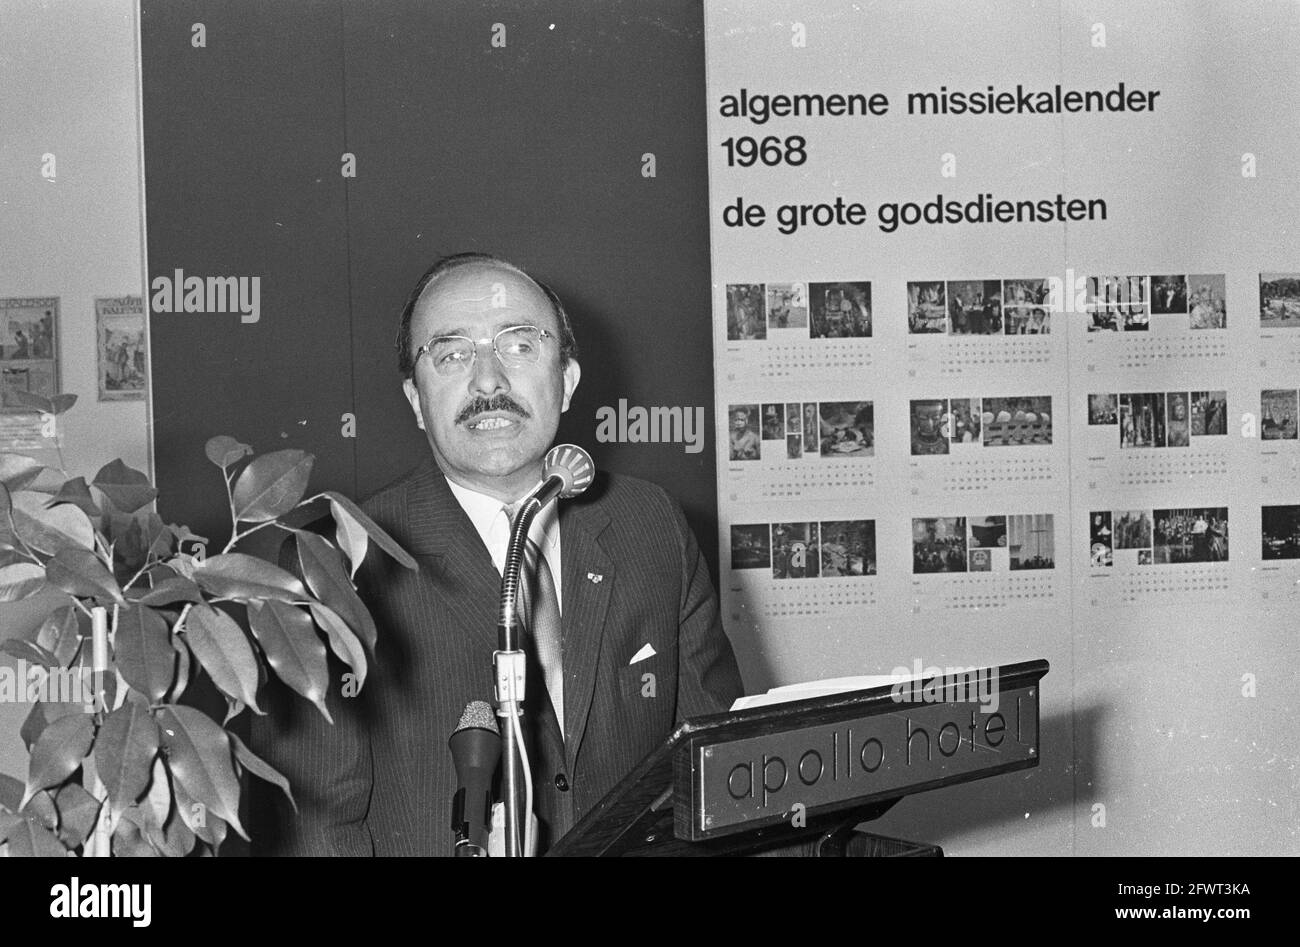 New Mission Calendar, introduced by Minister of State mr. Cals, September 25, 1967, CALENDARS, The Netherlands, 20th century press agency photo, news to remember, documentary, historic photography 1945-1990, visual stories, human history of the Twentieth Century, capturing moments in time Stock Photo